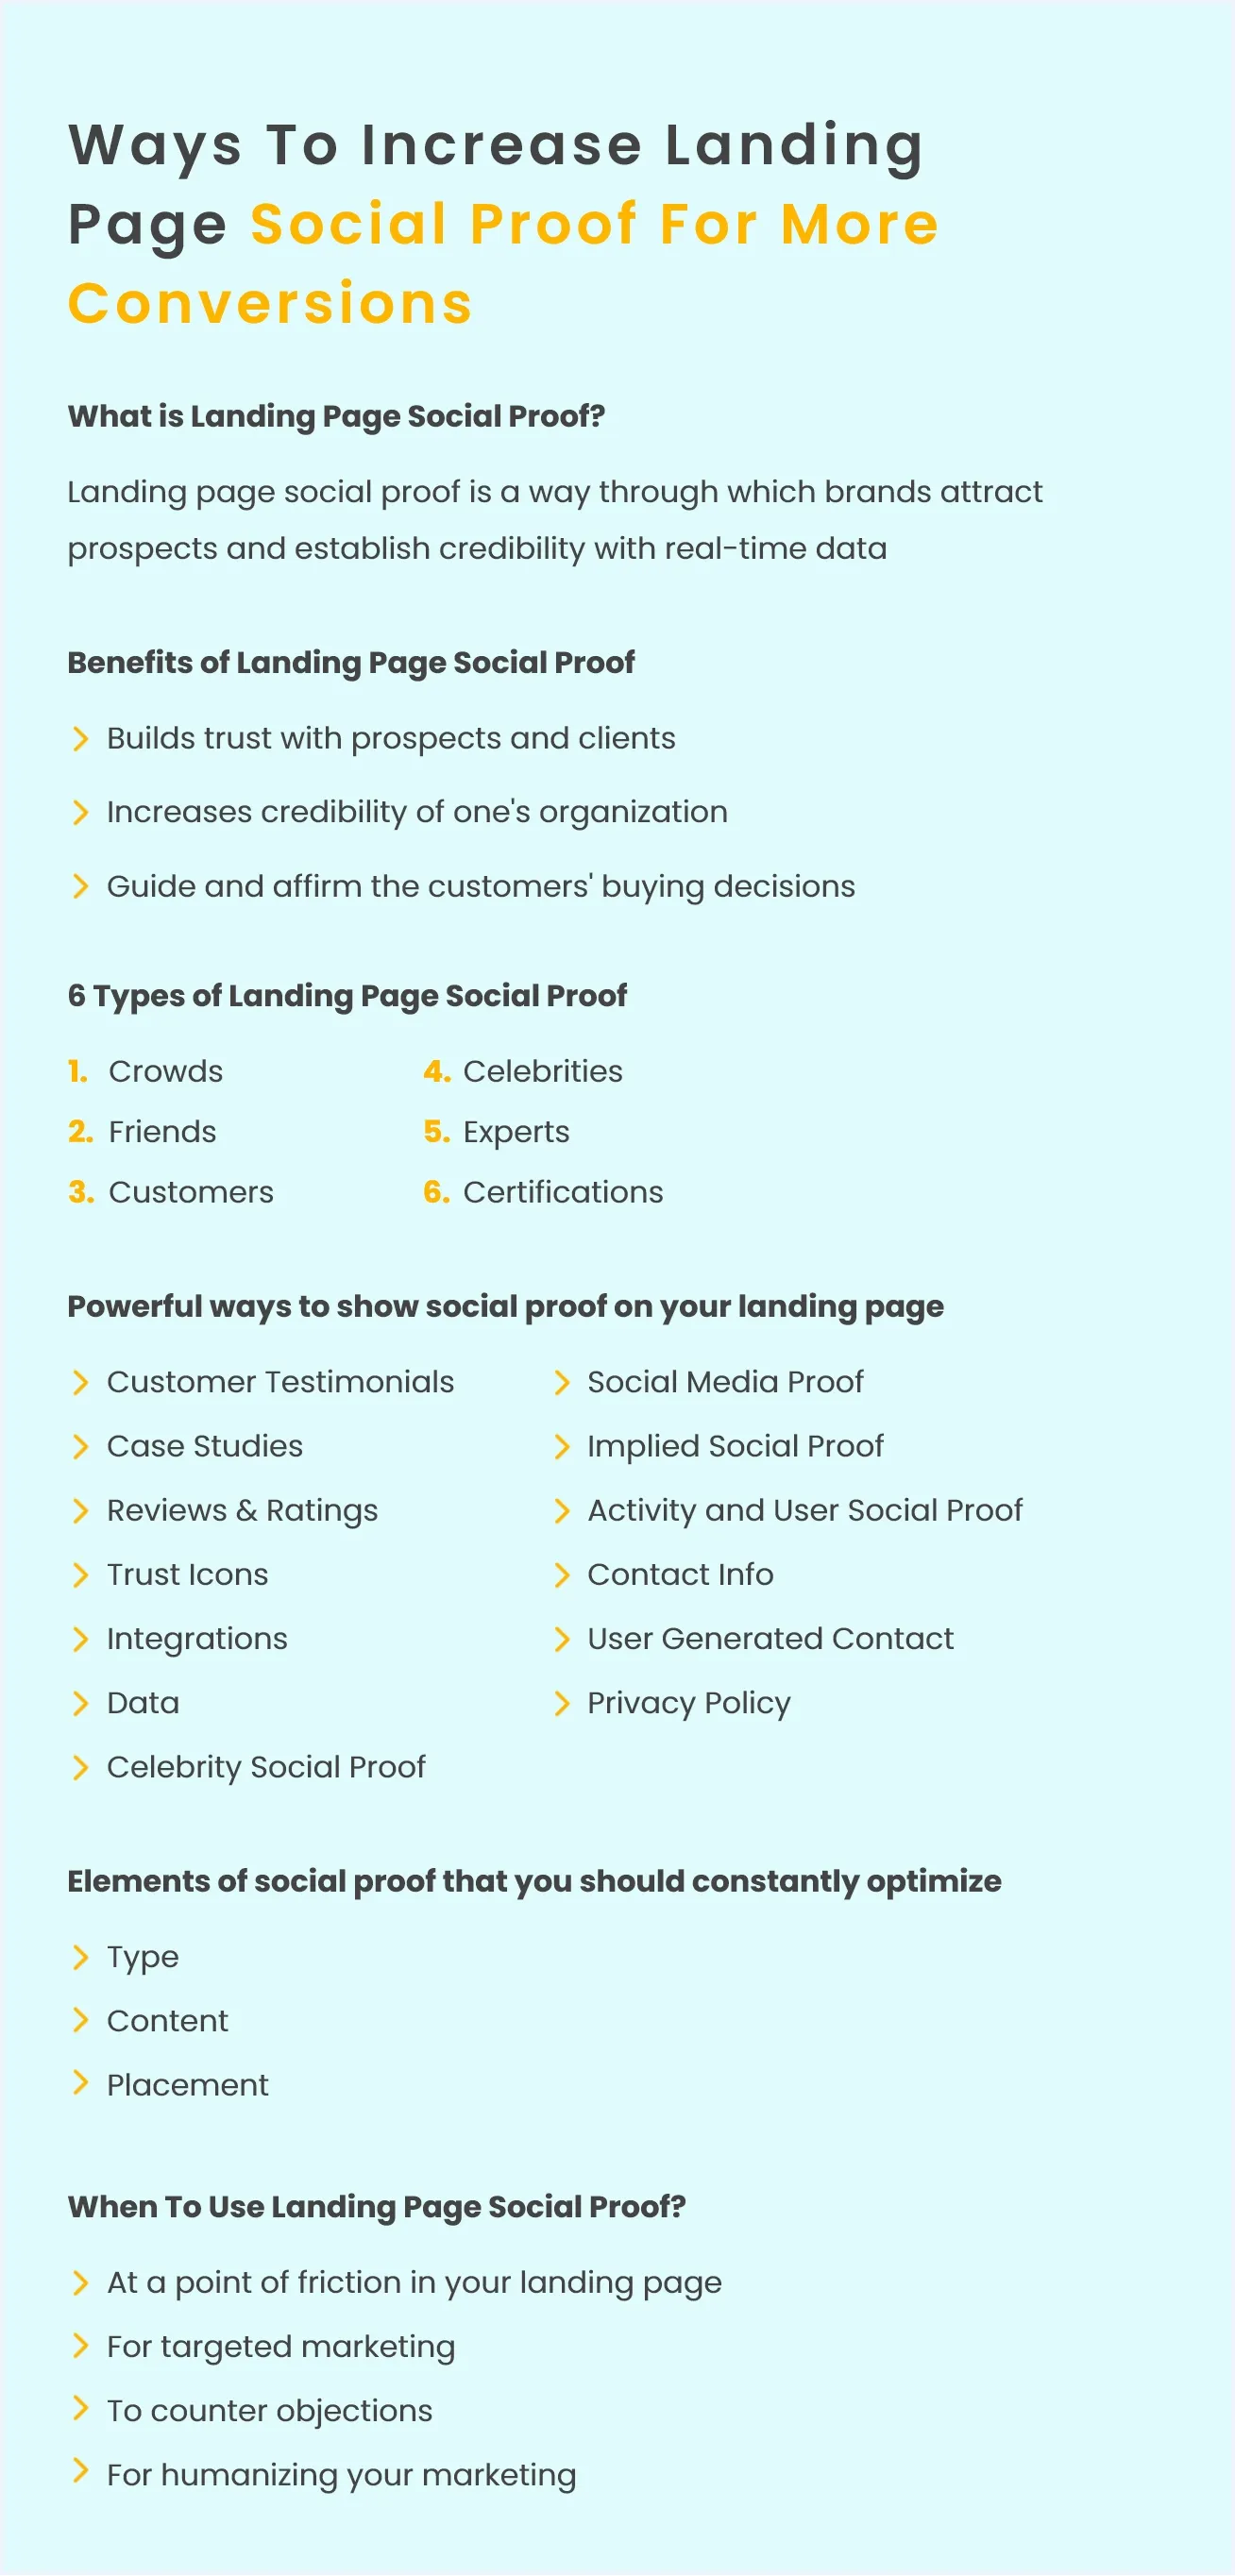 ways-to-increase-landing-page-social-proof-for-more-conversions-22.webp